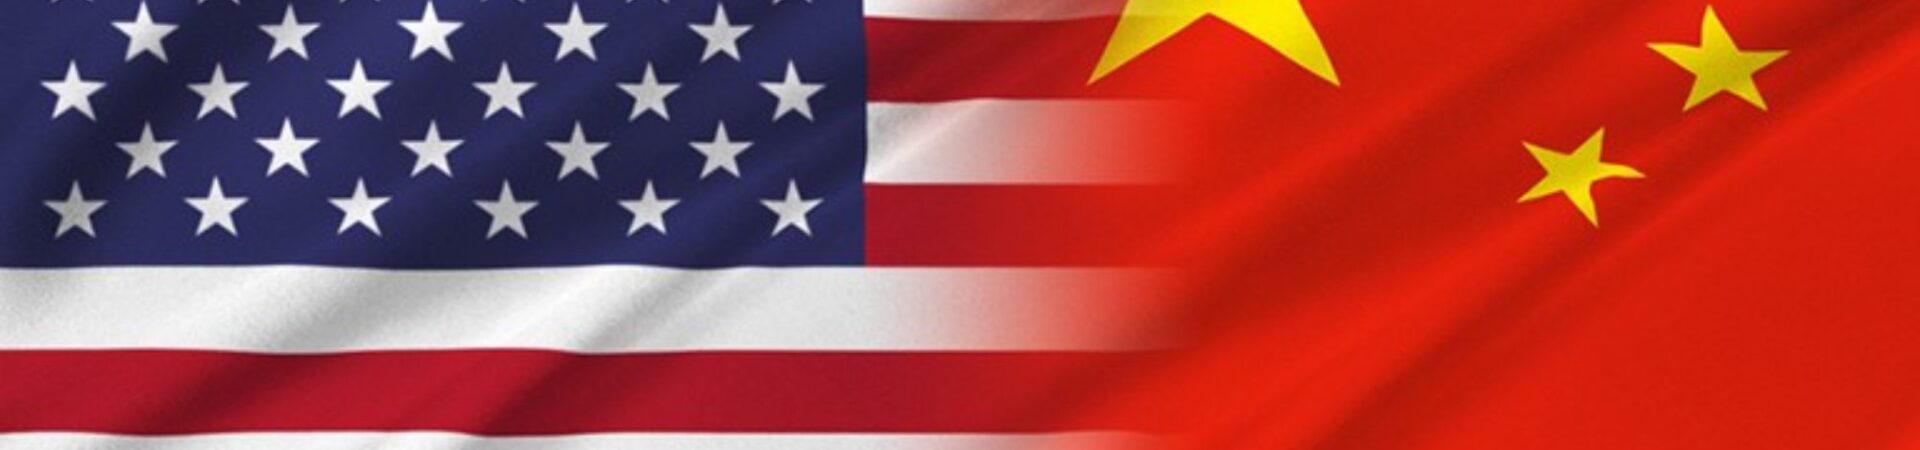 US Law for effective supervision of Chinese shell companies on the anvil